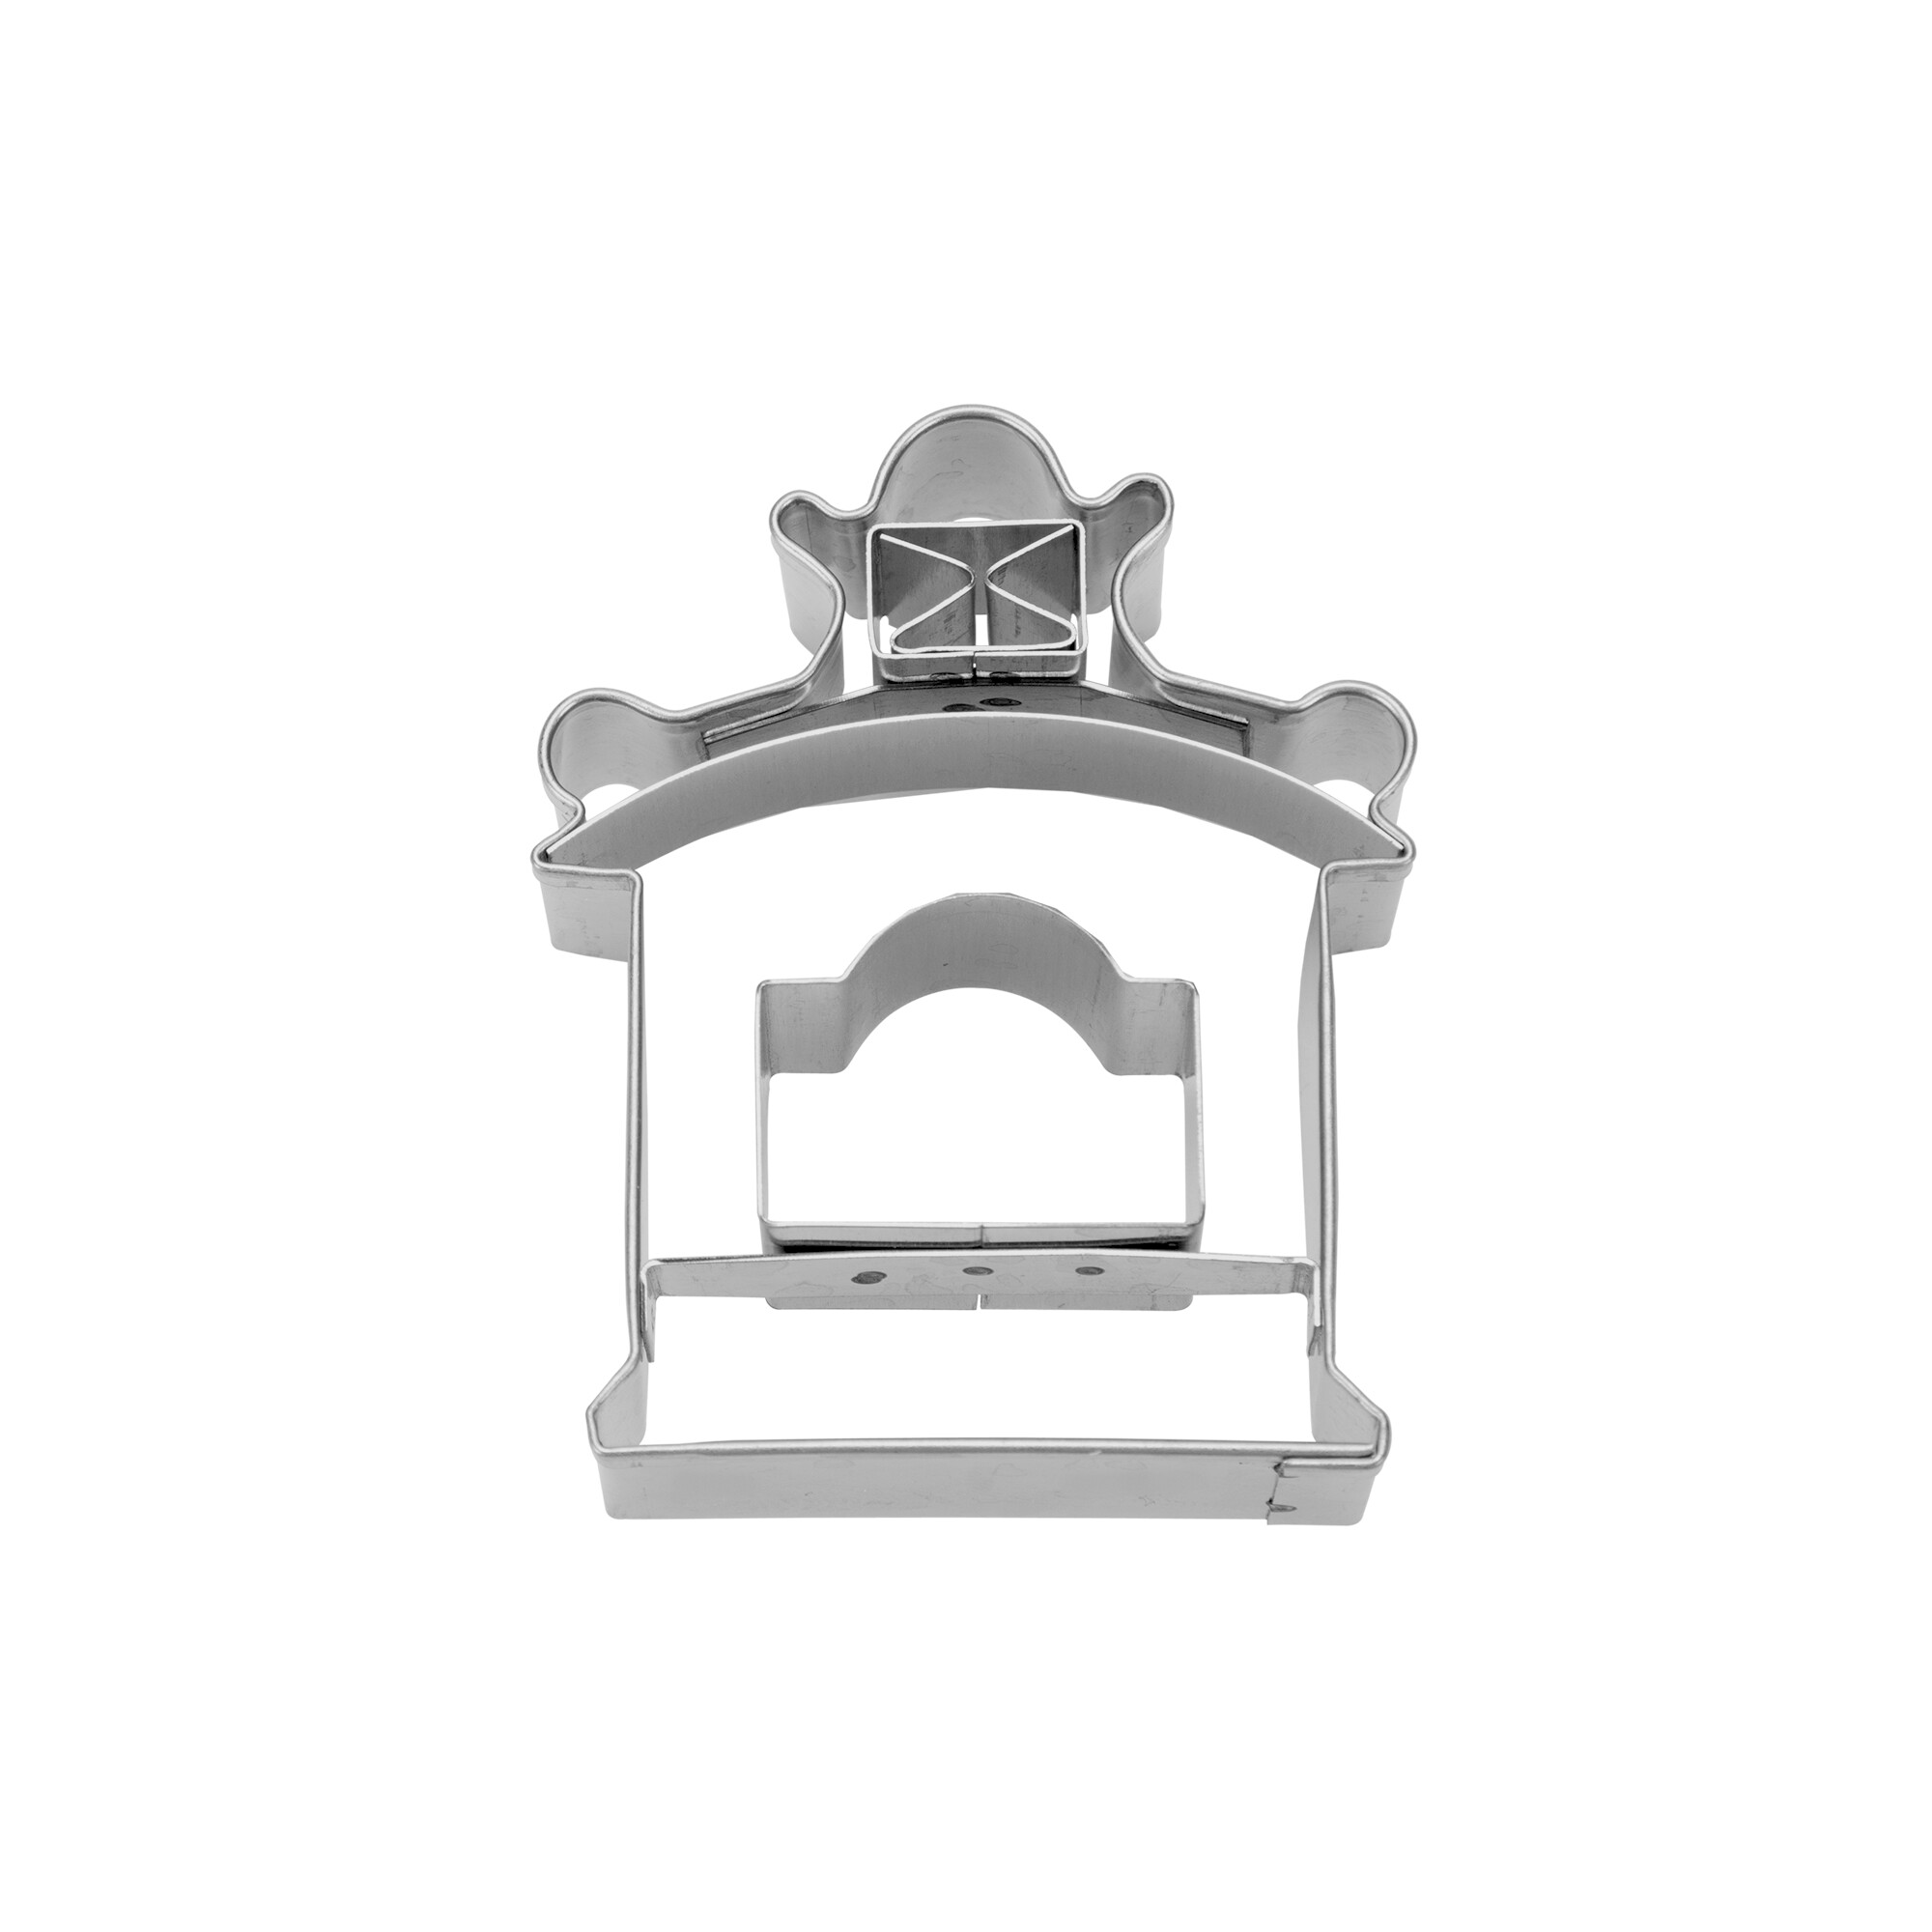 Cookie cutter with stamp – Post box